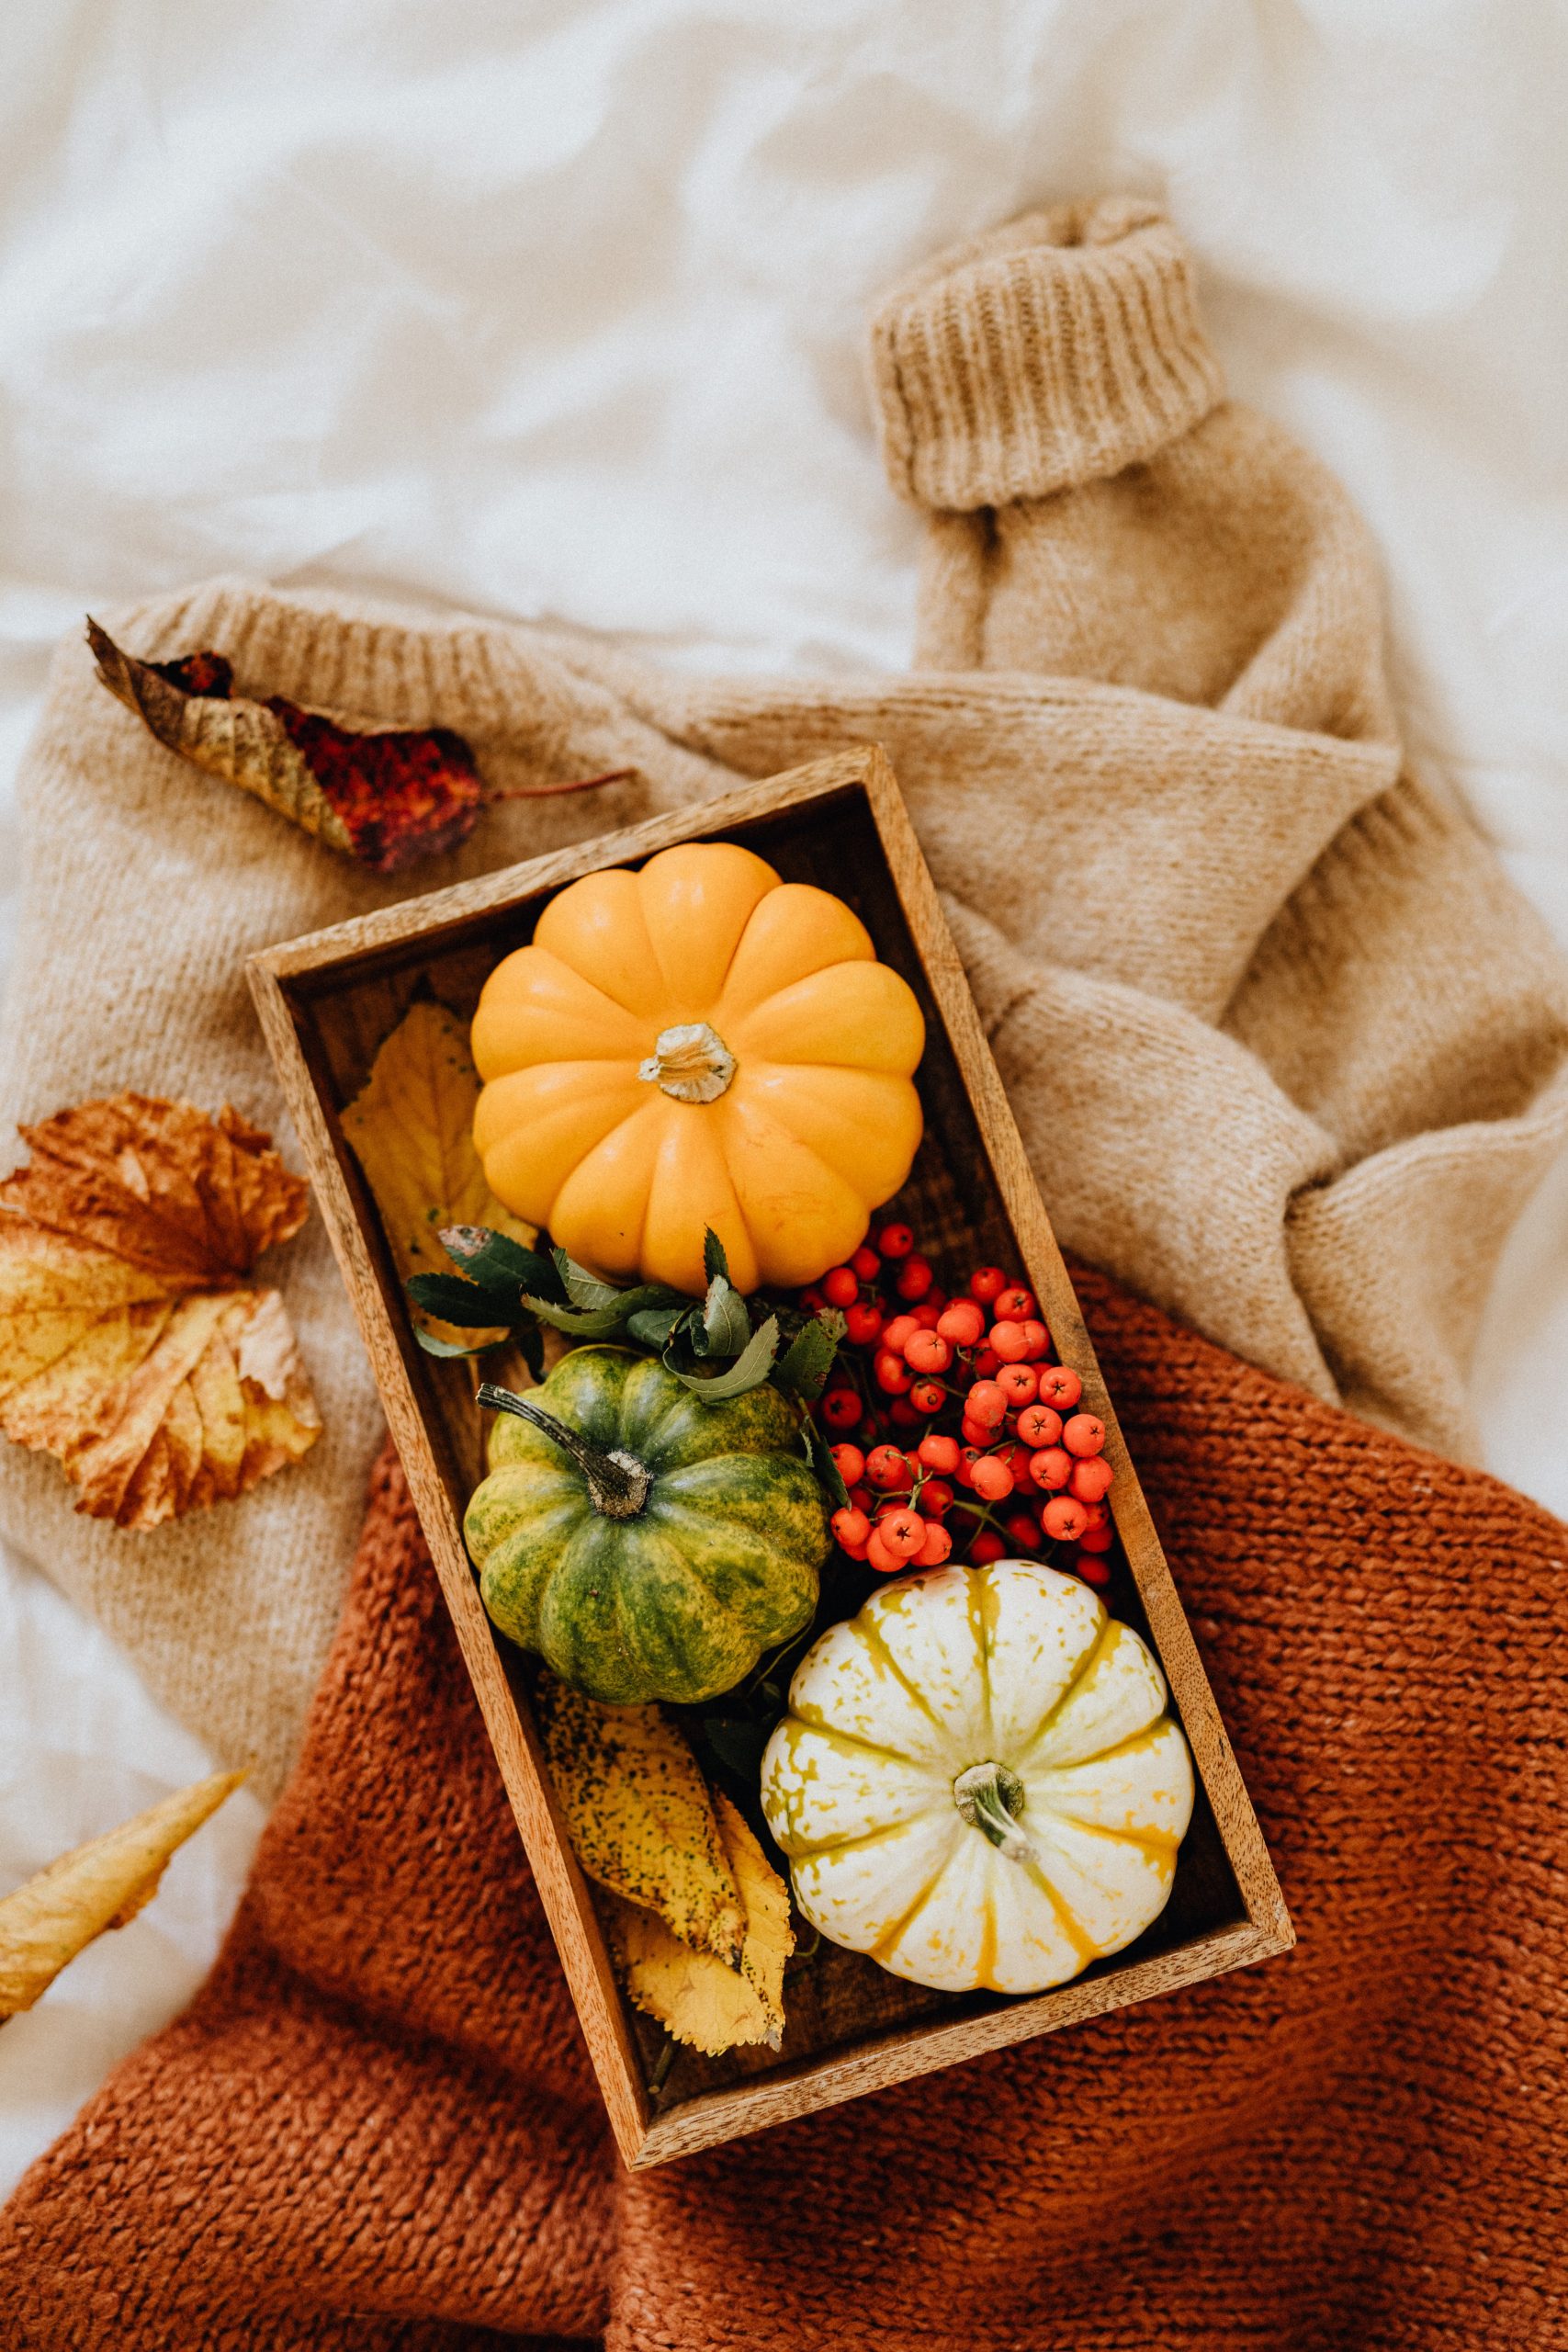 5 Tips For A Calm and Peaceful Thanksgiving - The Peaceful Nest